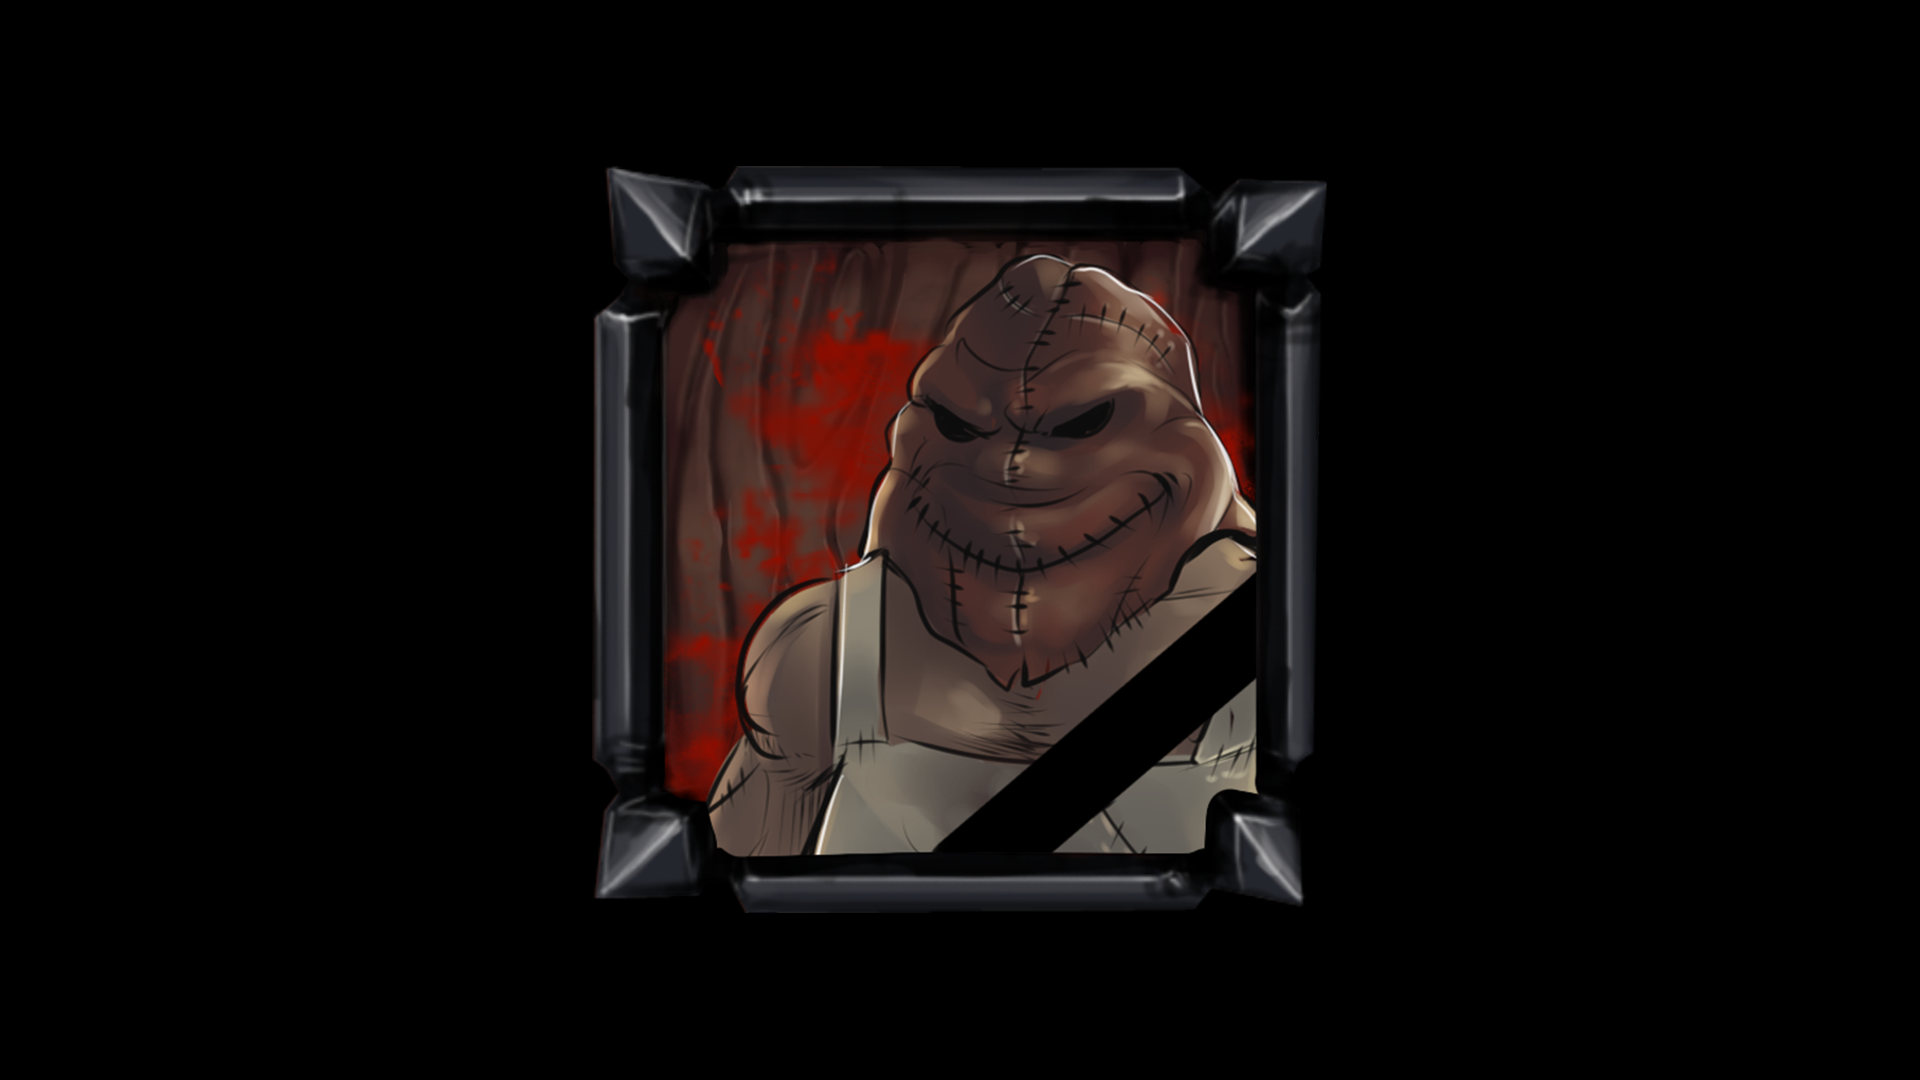 Icon for Butcher